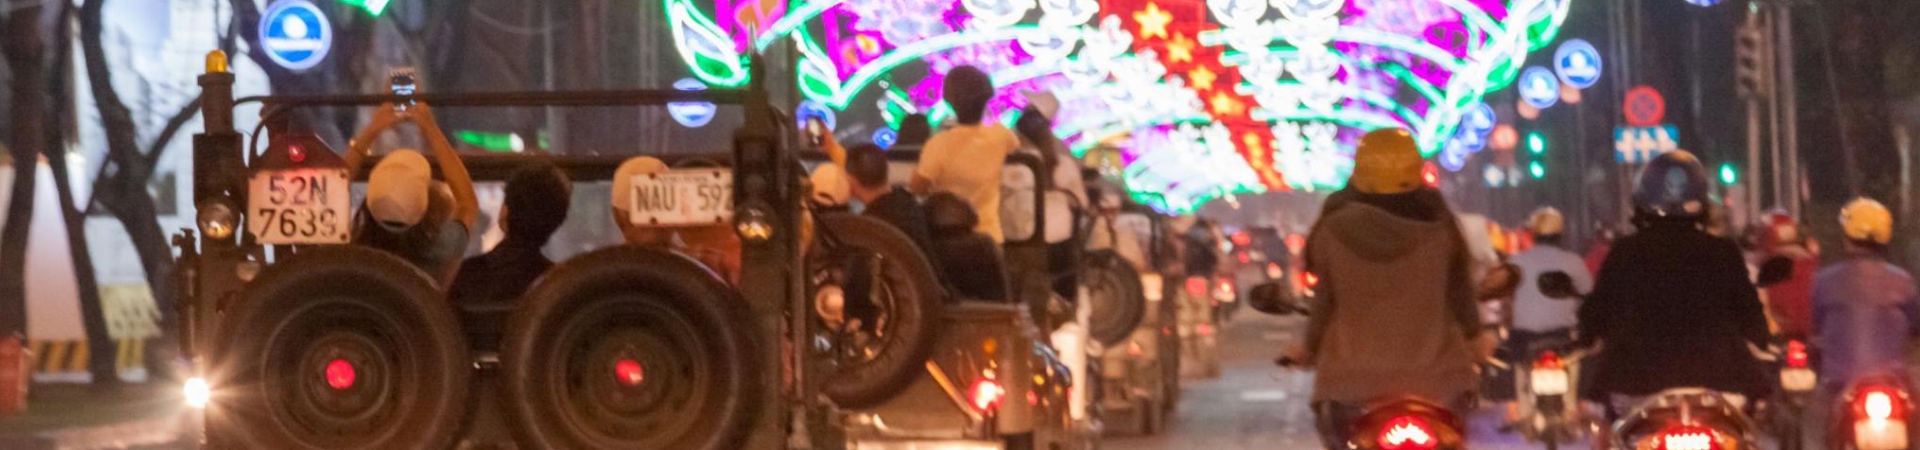 Image of Saigon After Dark by Vintage Jeep